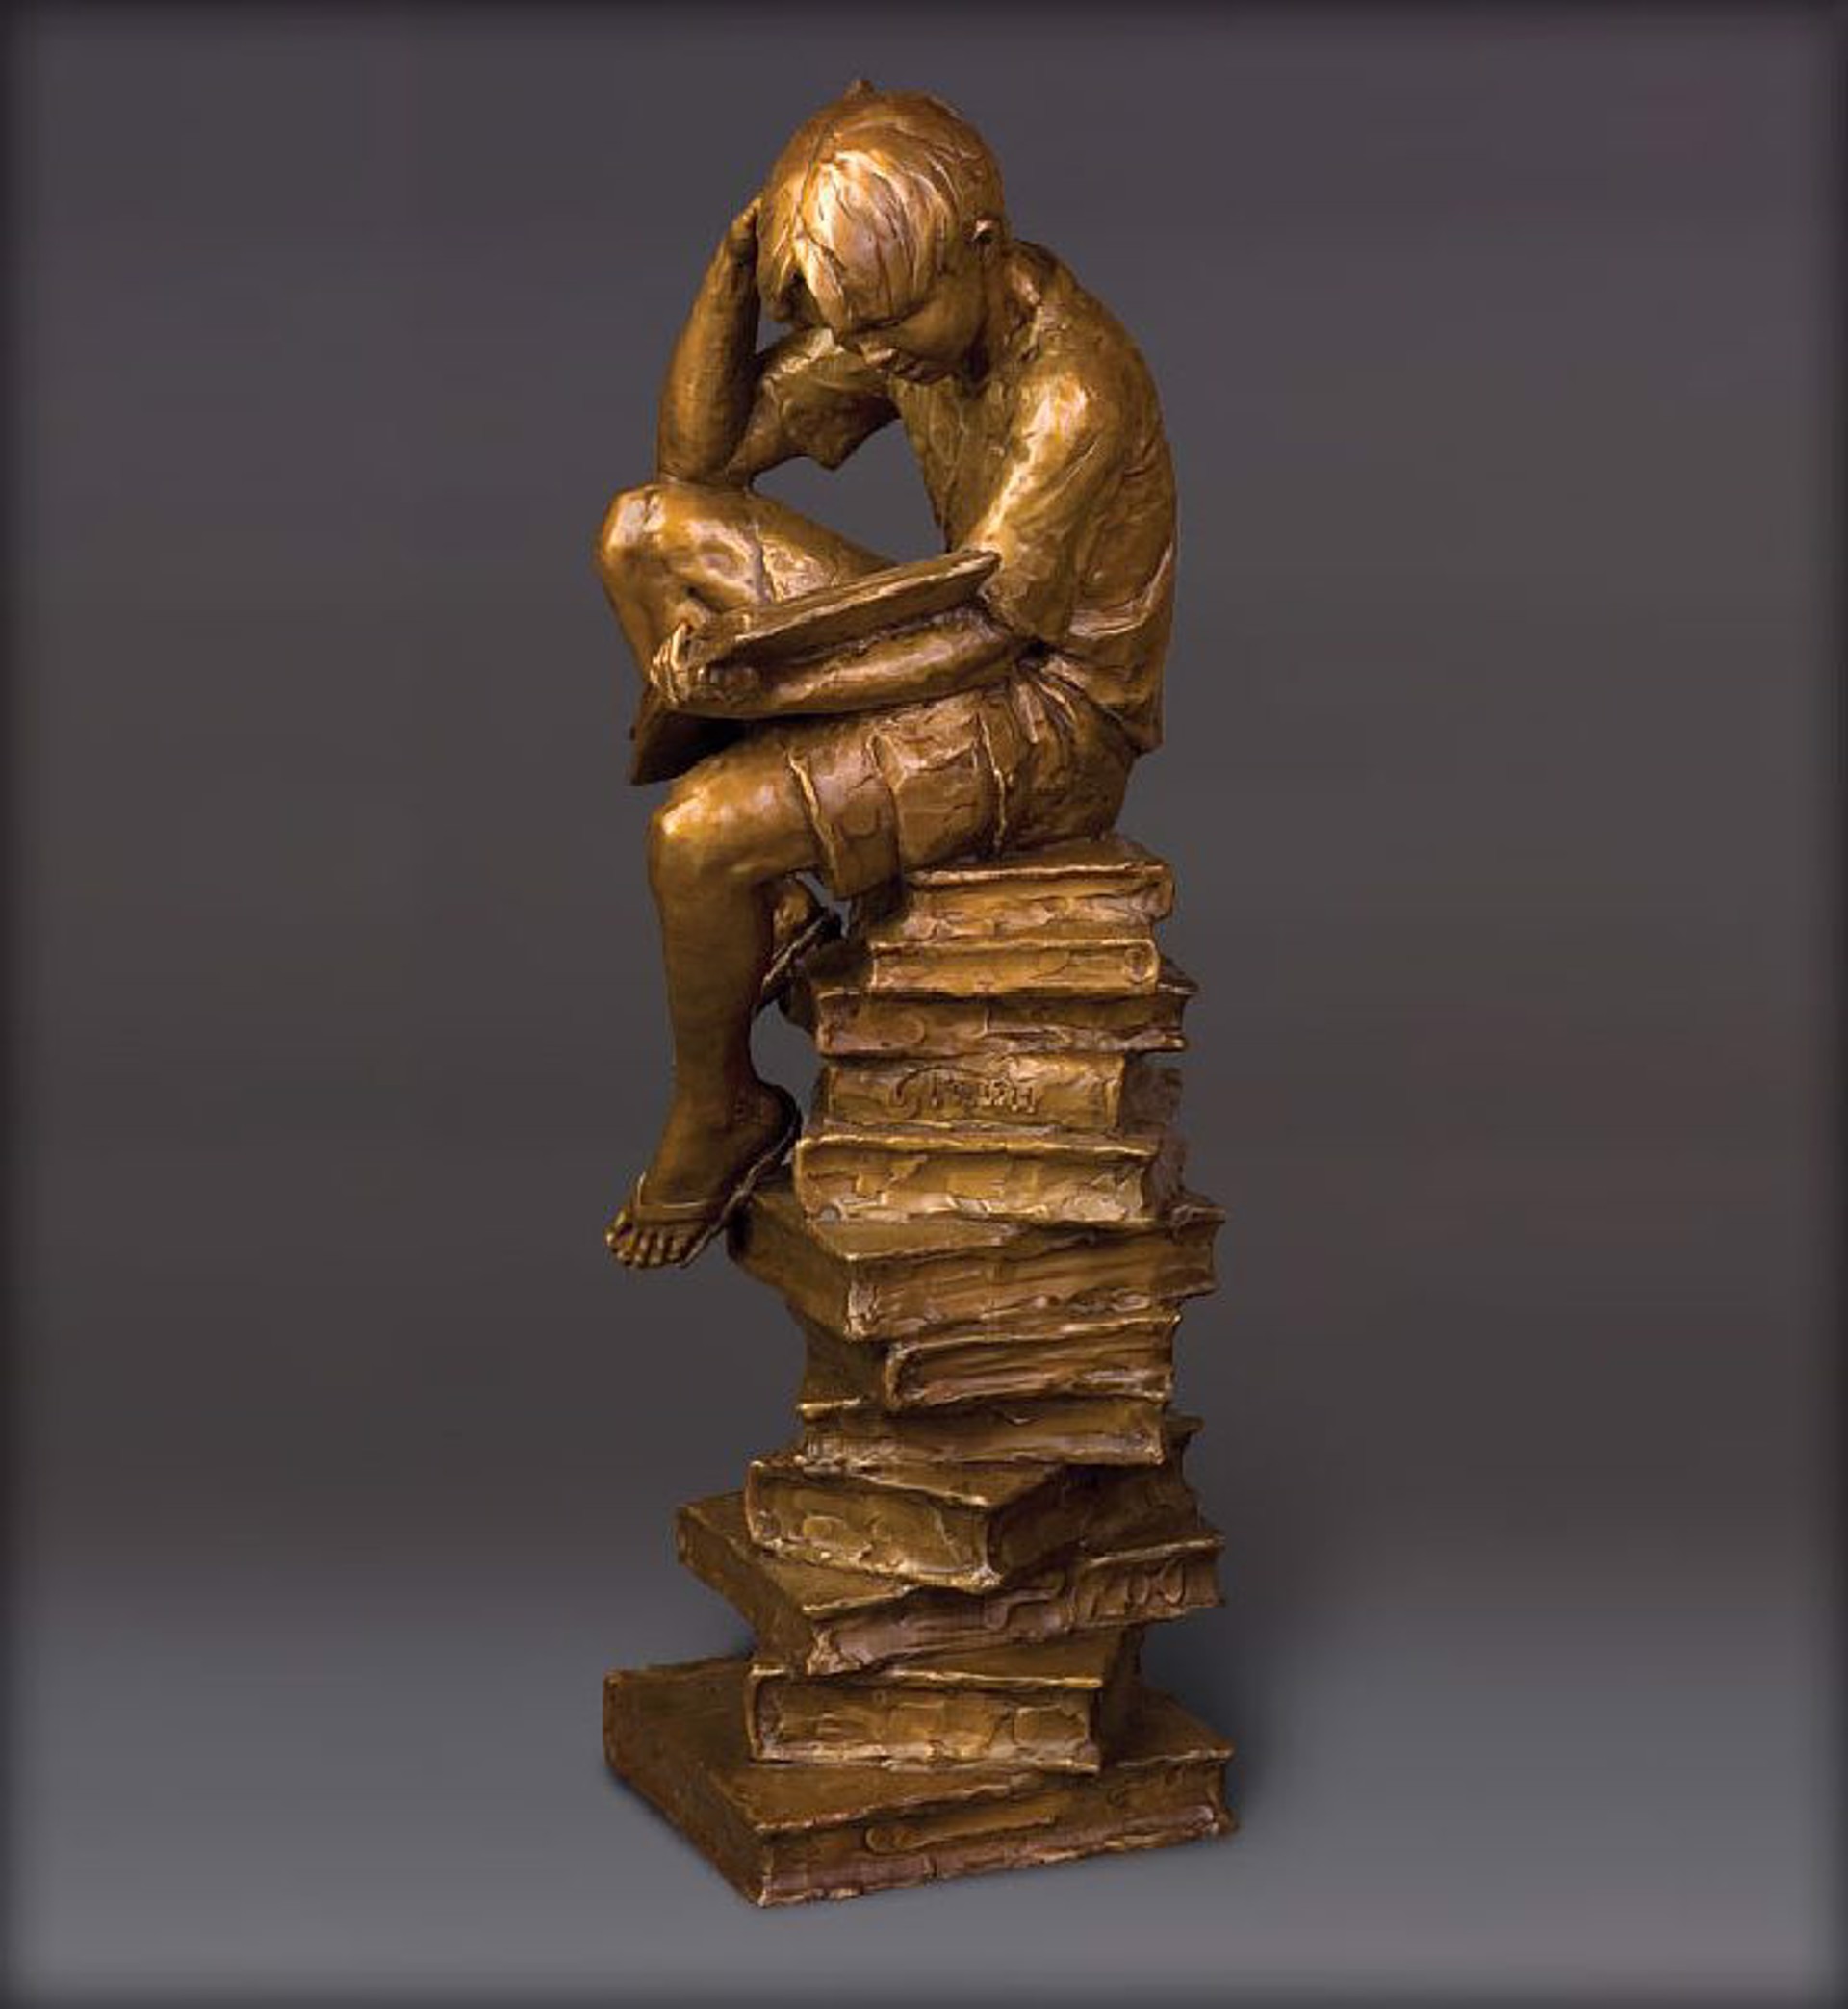 New Heights of Knowledge: The Thinker by Gary Lee Price (sculptor)